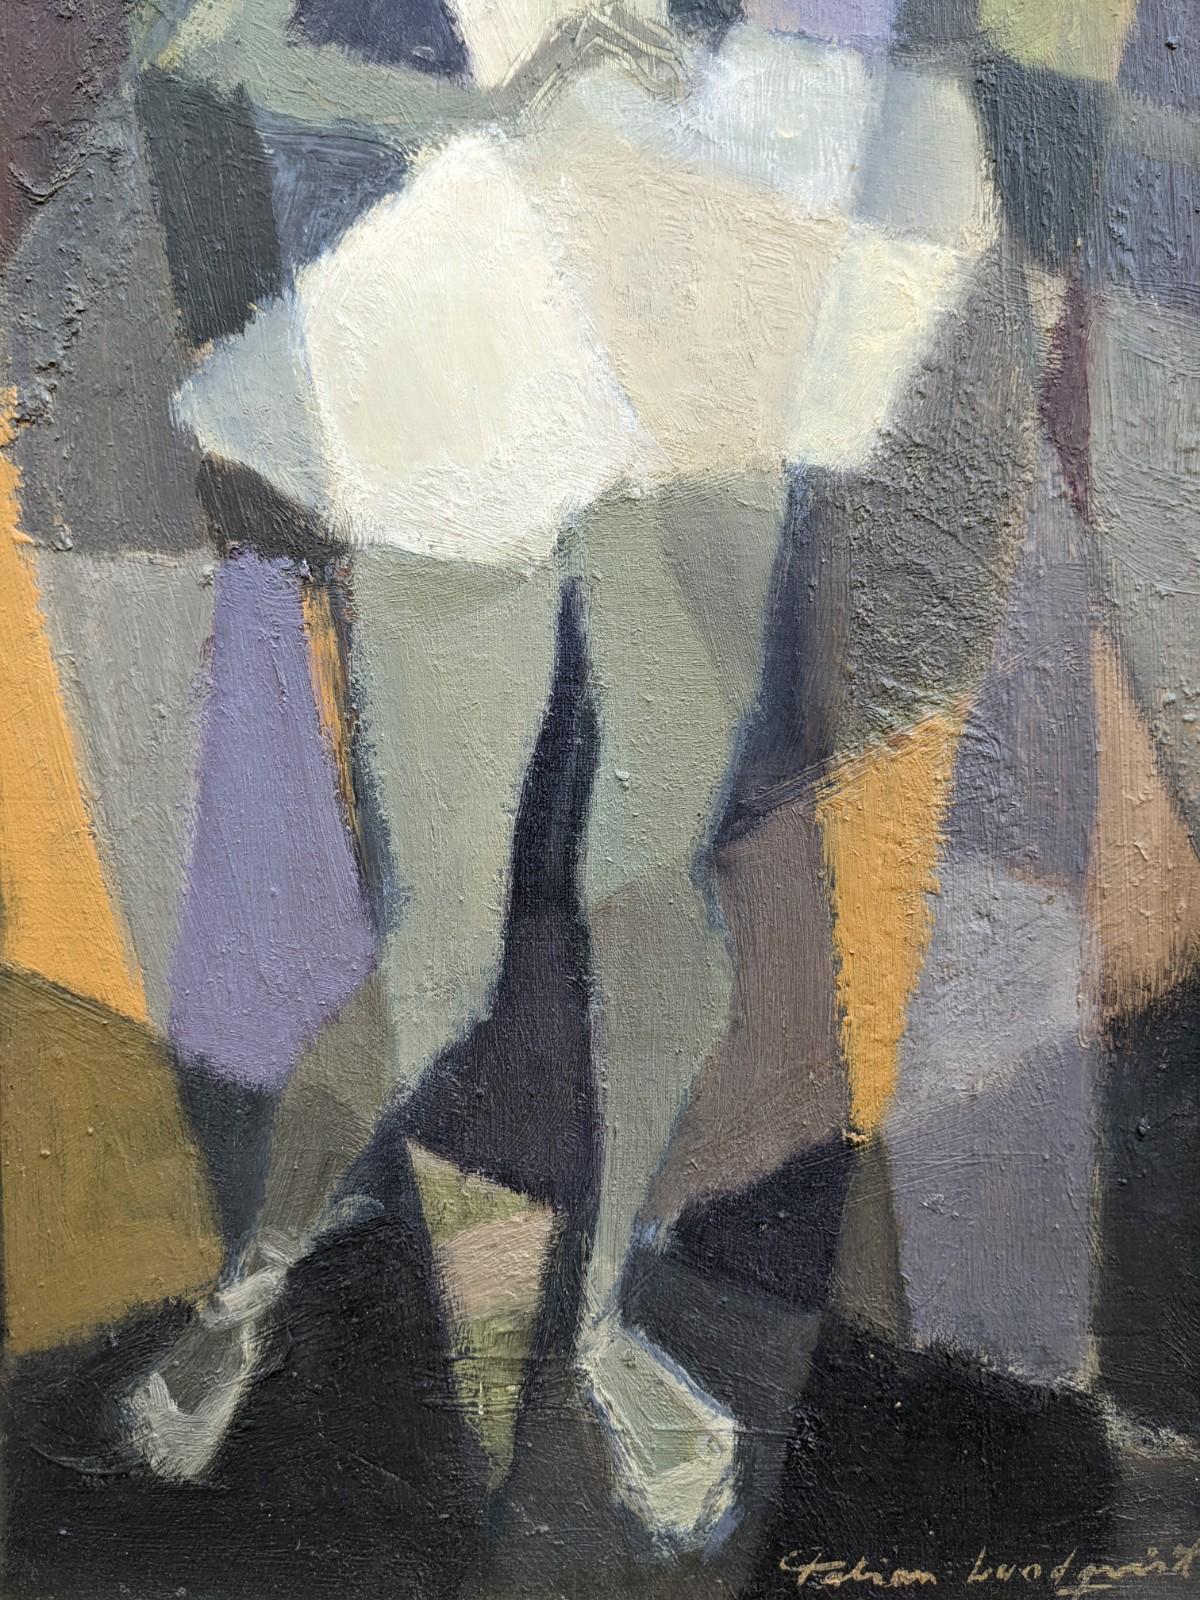 CUBIST DANCER
Size: 54 x 35 cm (including frame)
Oil on canvas

A very charming mid century figurative composition, painted in oil onto canvas.

Characterised by a cubist ethos, a ballet dancer stands starkly against an abstracted and fragmented